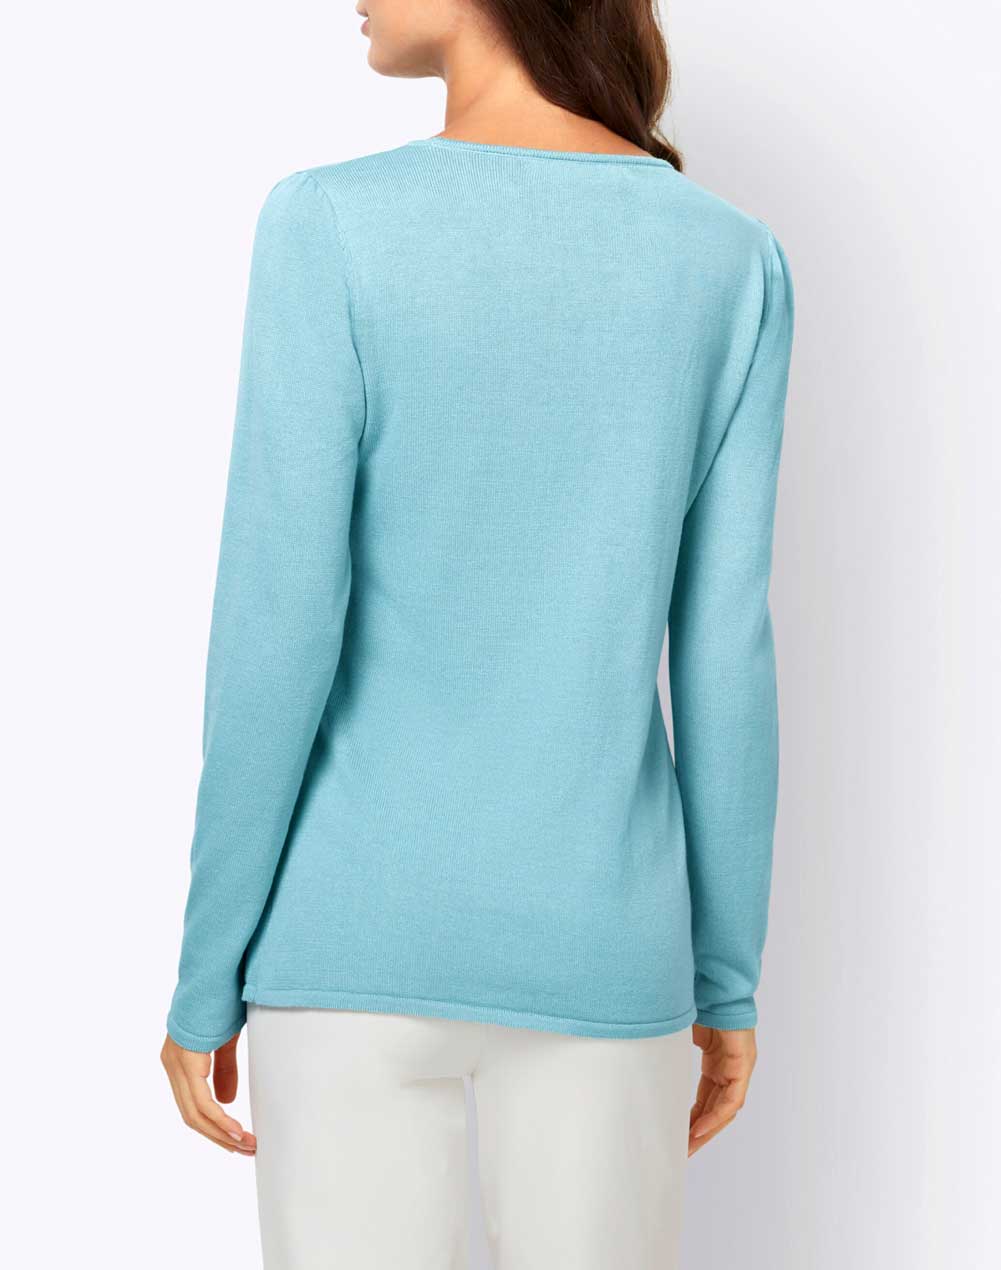 Cut-Outs-Pullover, aquamarin Missforty